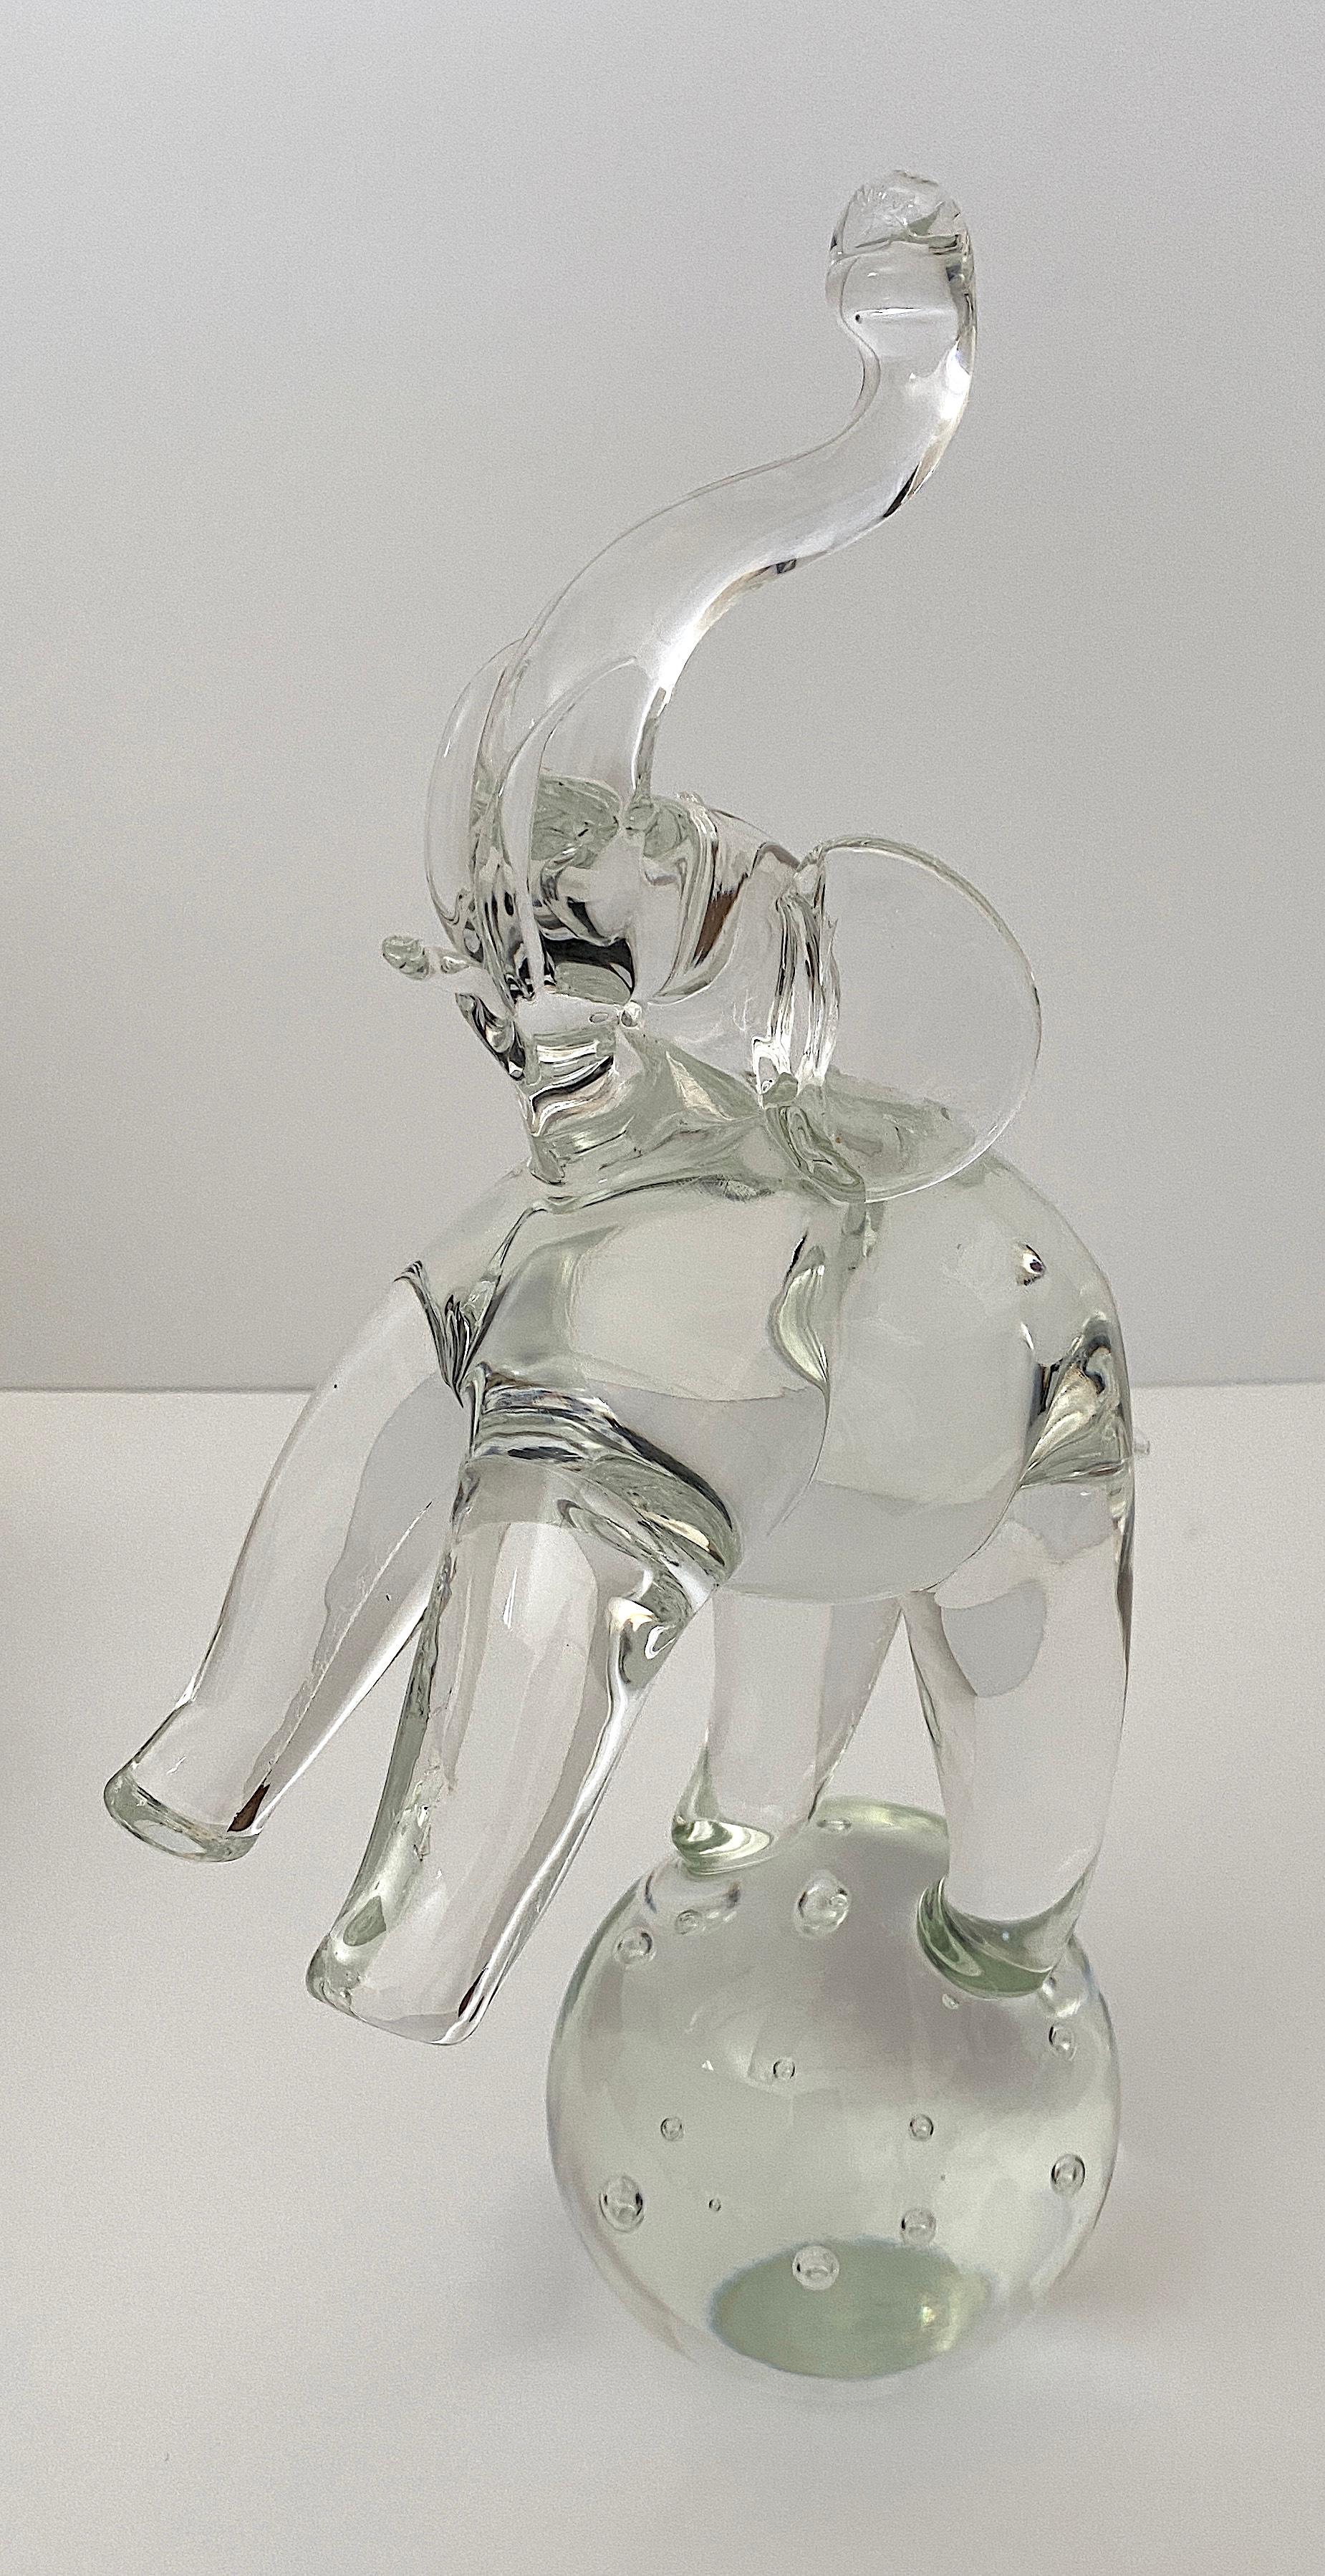 Charming vintage Artisan glass Elephant sculpture on a Controlled Bubble Globe from a Palm Beach estate

Signed on verso - see image.